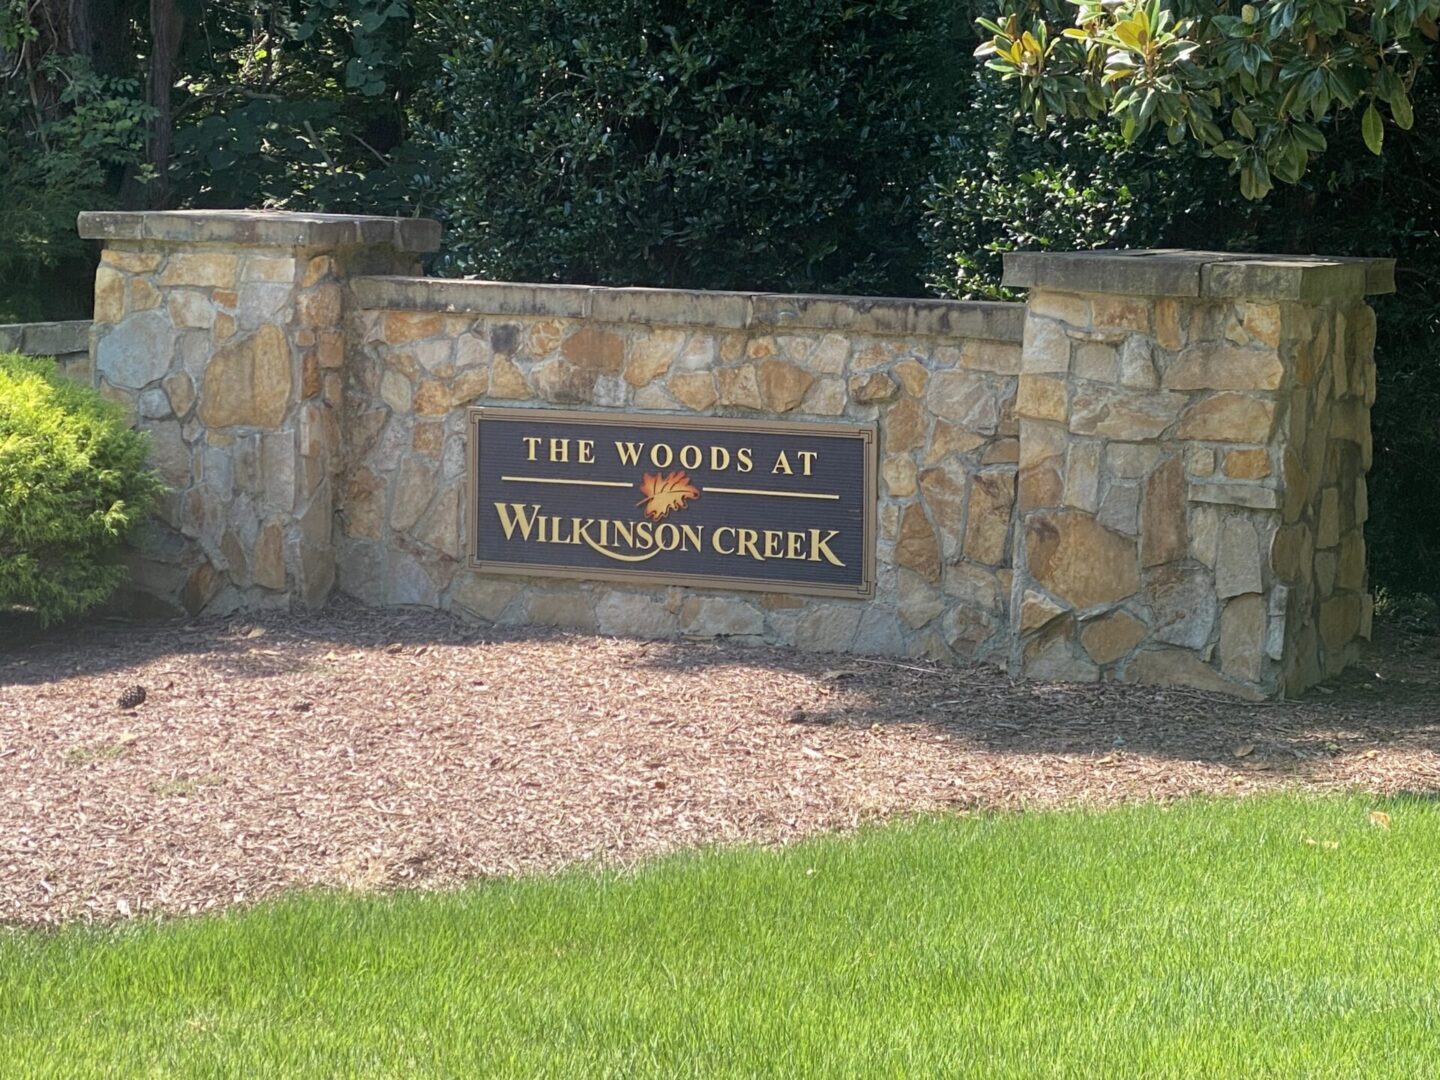 The Image of The Woods at Wilkinson Creek